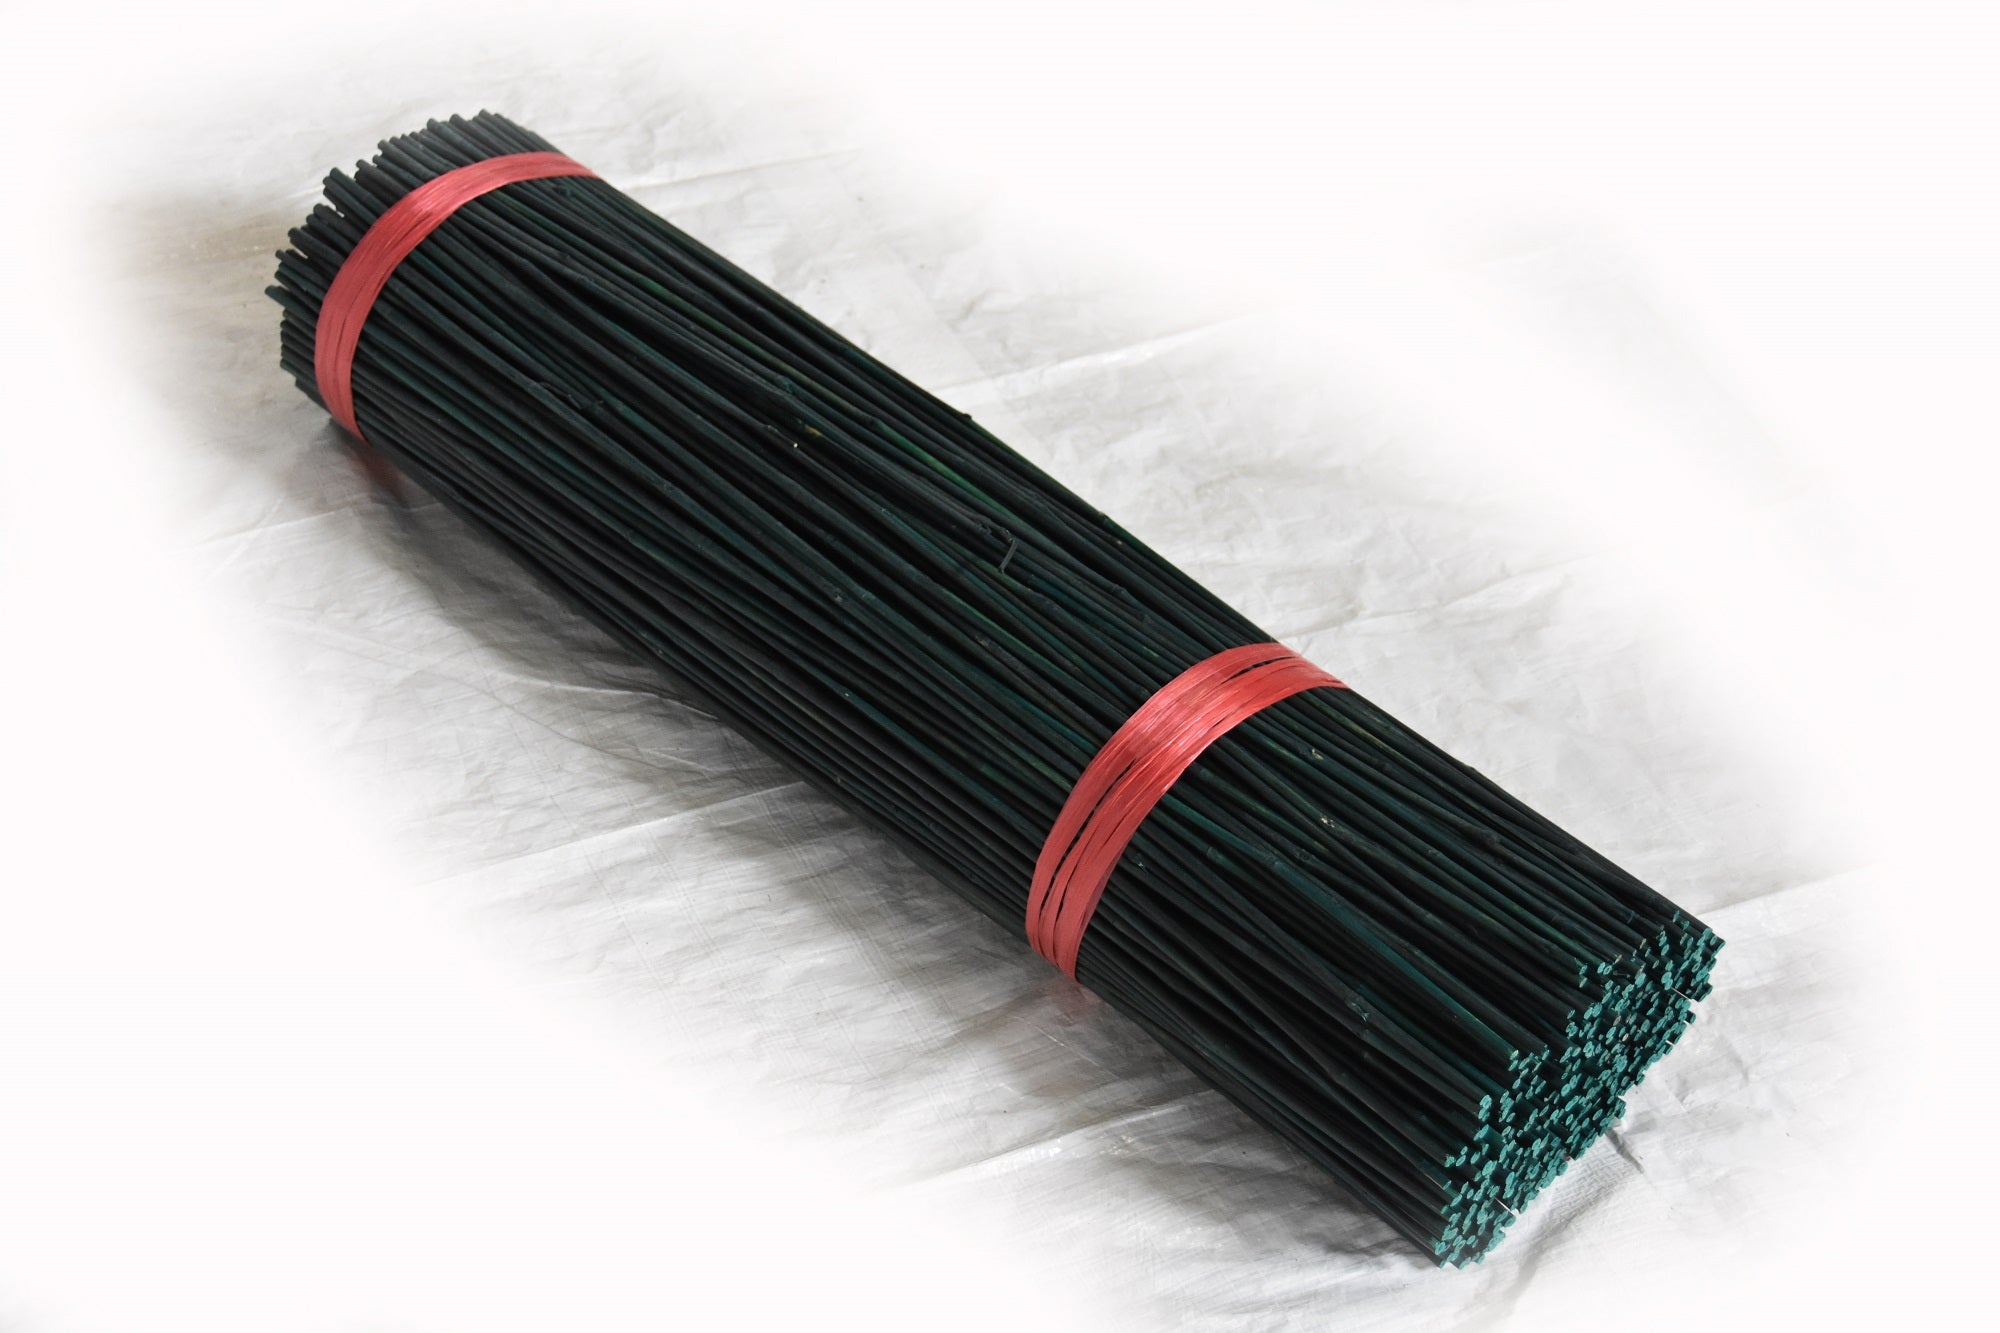 Dyed Green Bamboo Stakes 3'L x 6-8 mm - Bundle of 500 - Bamboo Toronto Store